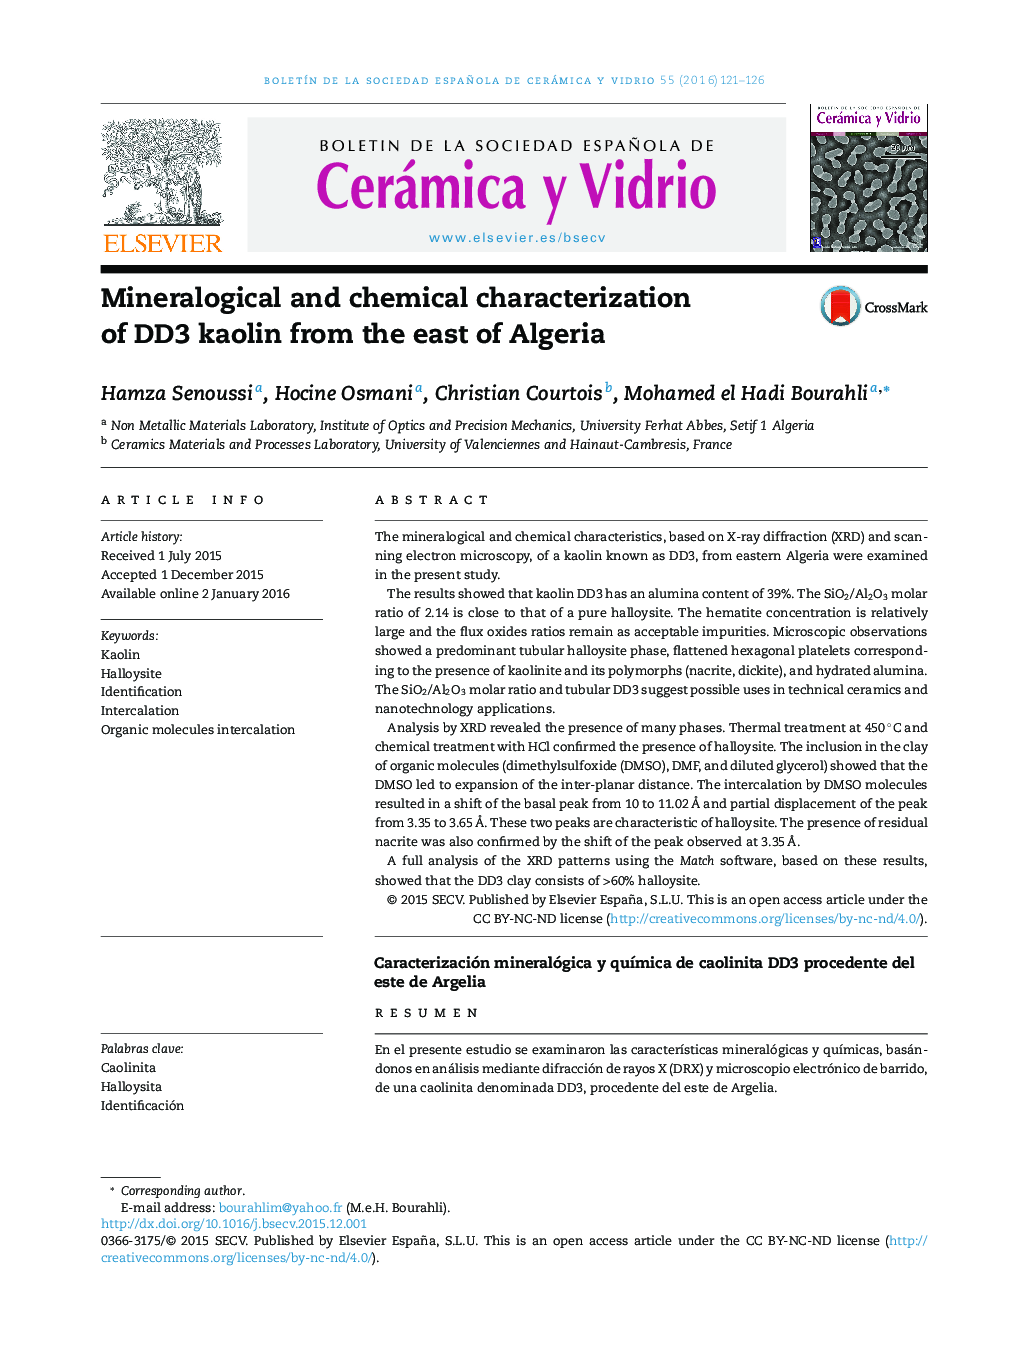 Mineralogical and chemical characterization of DD3 kaolin from the east of Algeria